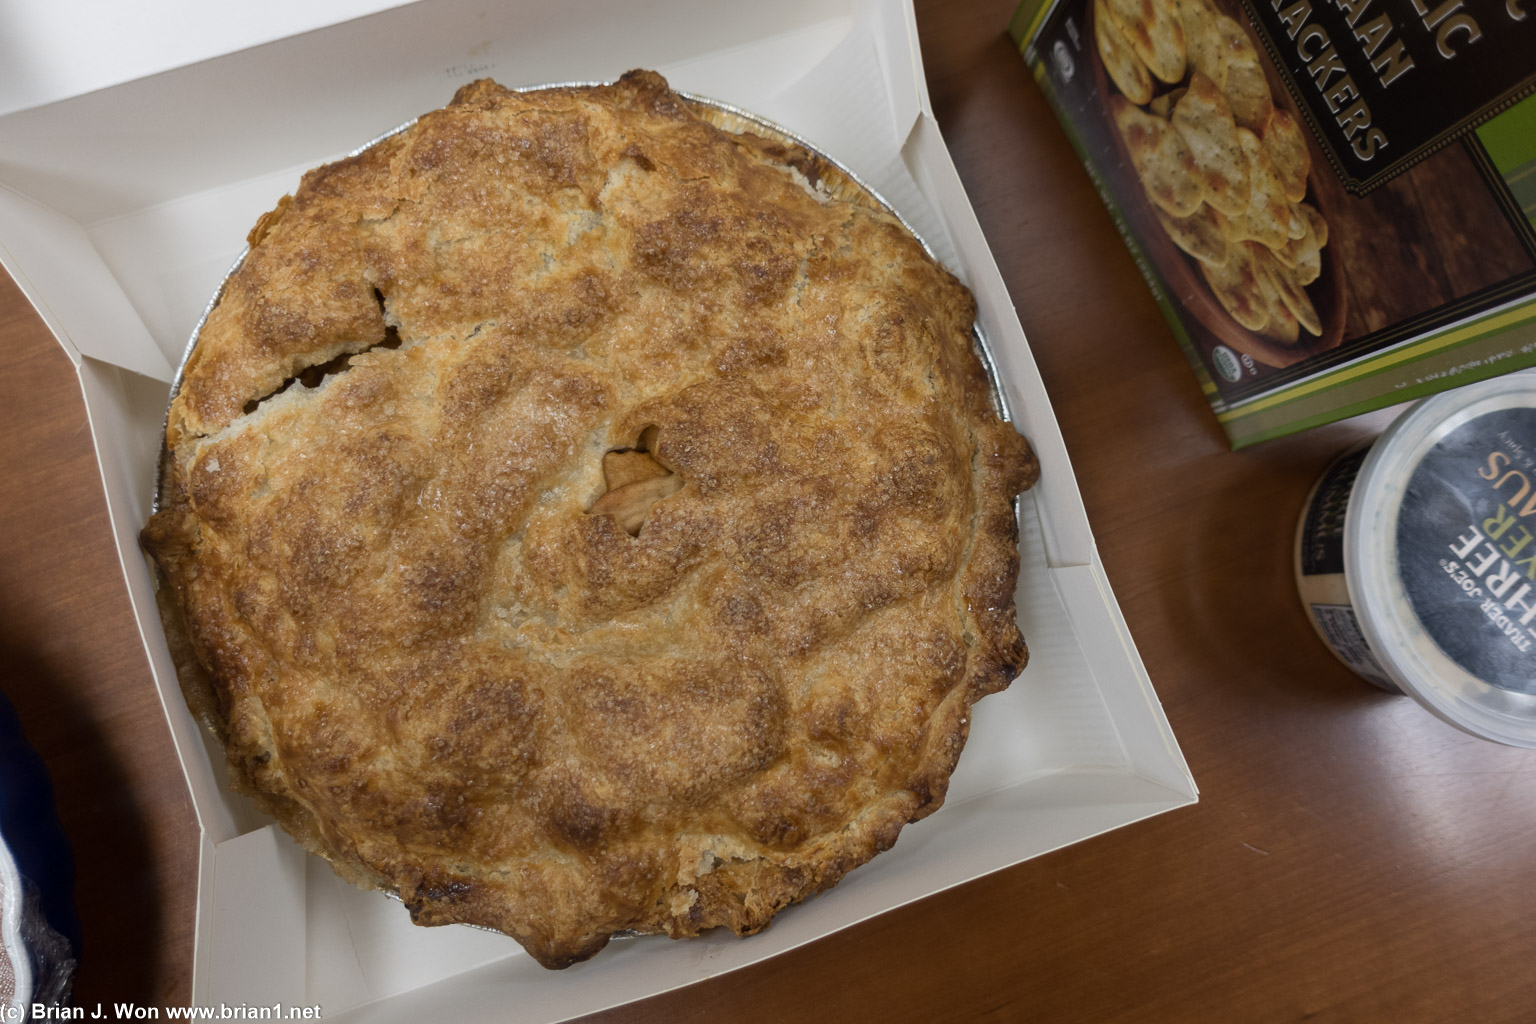 Apple pie from Winston Pies is friggin' delicious.